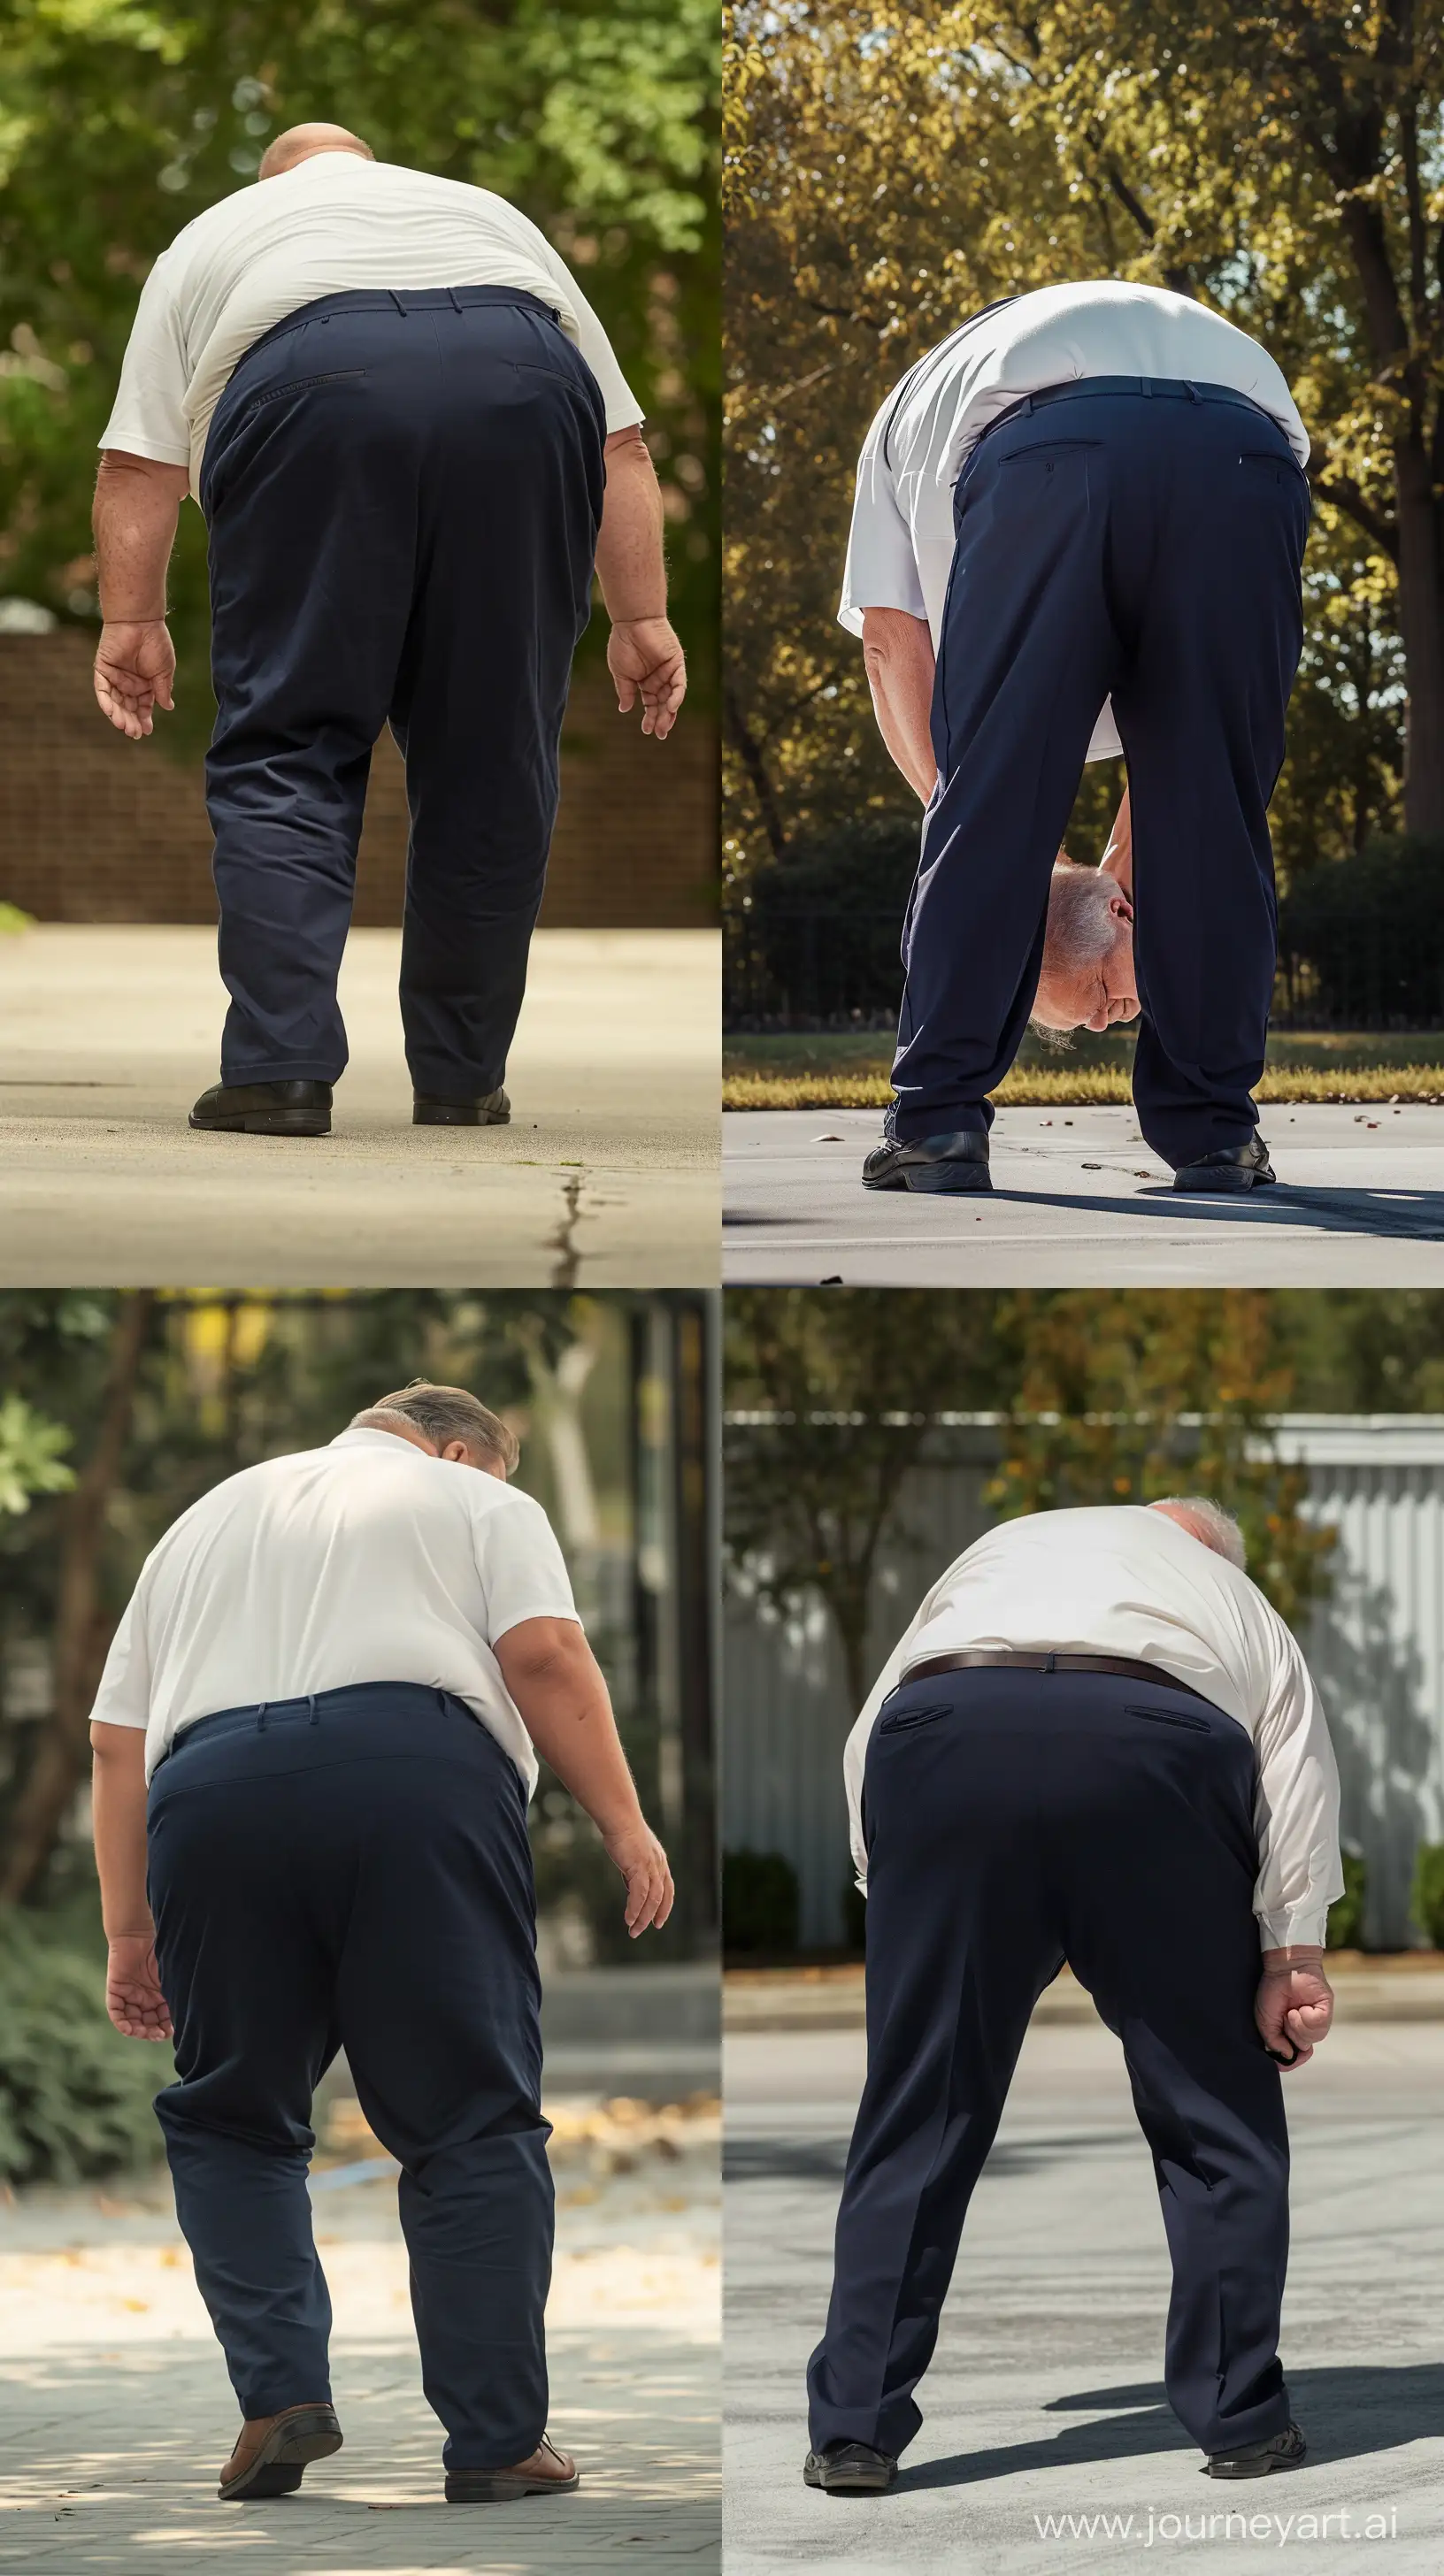 Elderly-Mans-Outdoor-Activity-Bending-Over-in-Navy-Pants-and-White-Shirt